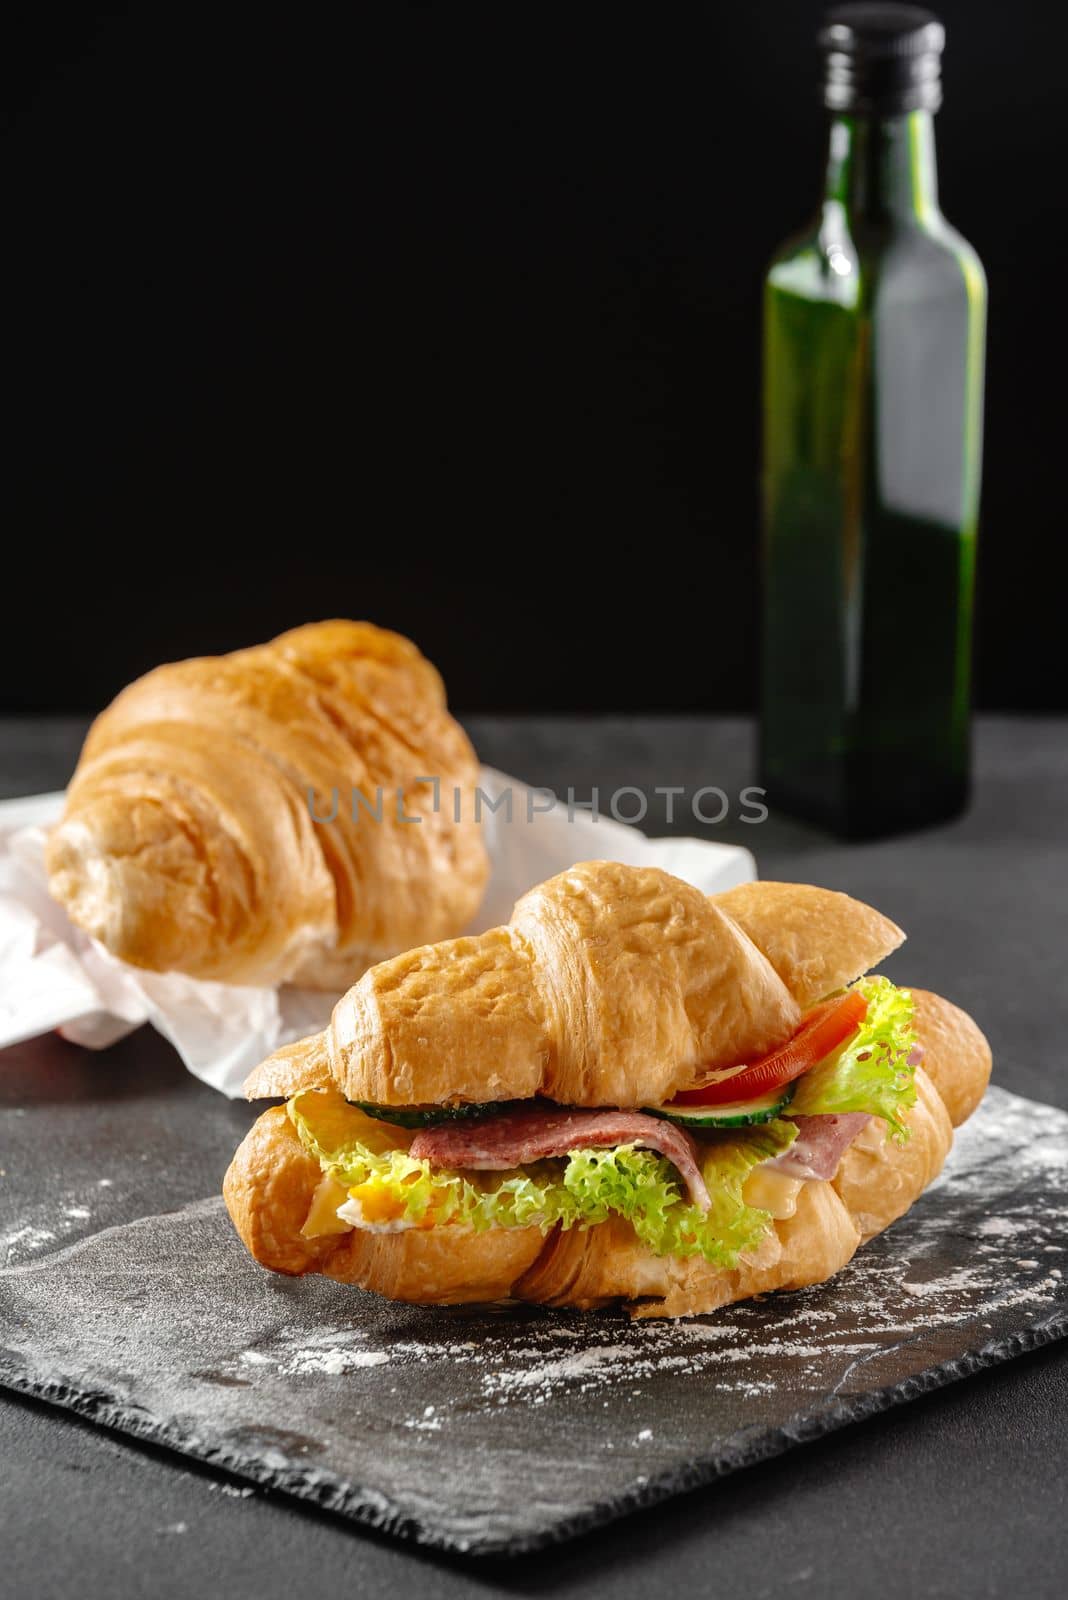 Delicious breakfast. Big croissant sandwich with sausage, cheese and tomato.